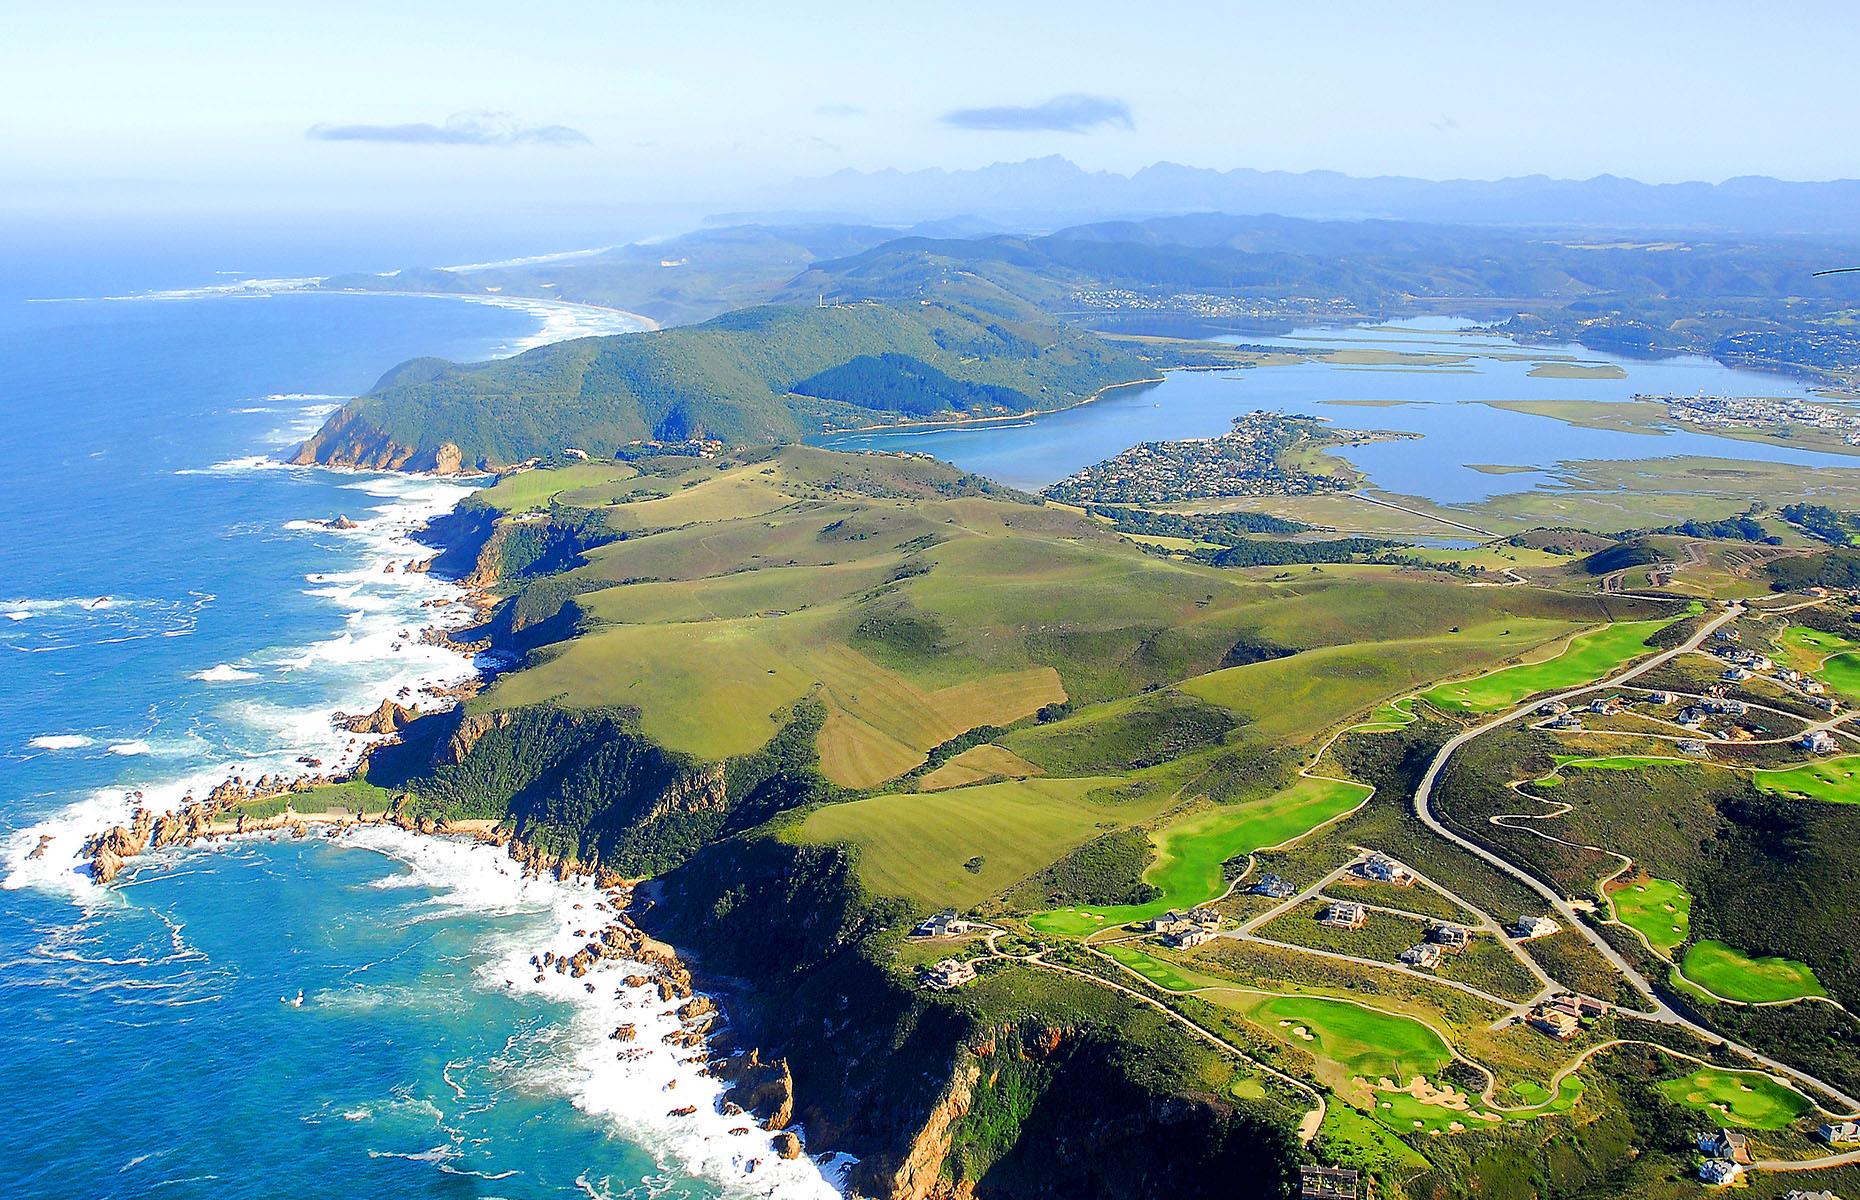 <p>From glorious beaches to lush green hills, the <a href="https://www.loveexploring.com/guides/65670/the-garden-route-south-africa">Garden Route</a> traces South Africa’s south-eastern coast. Flanked between the Indian Ocean and verdant mountains, the 125-mile journey extends from Mossel Bay in the Western Cape to Storms River in the Eastern Cape, taking in Knysna, Plettenberg Bay, and Tsitsikamma National Park.</p>